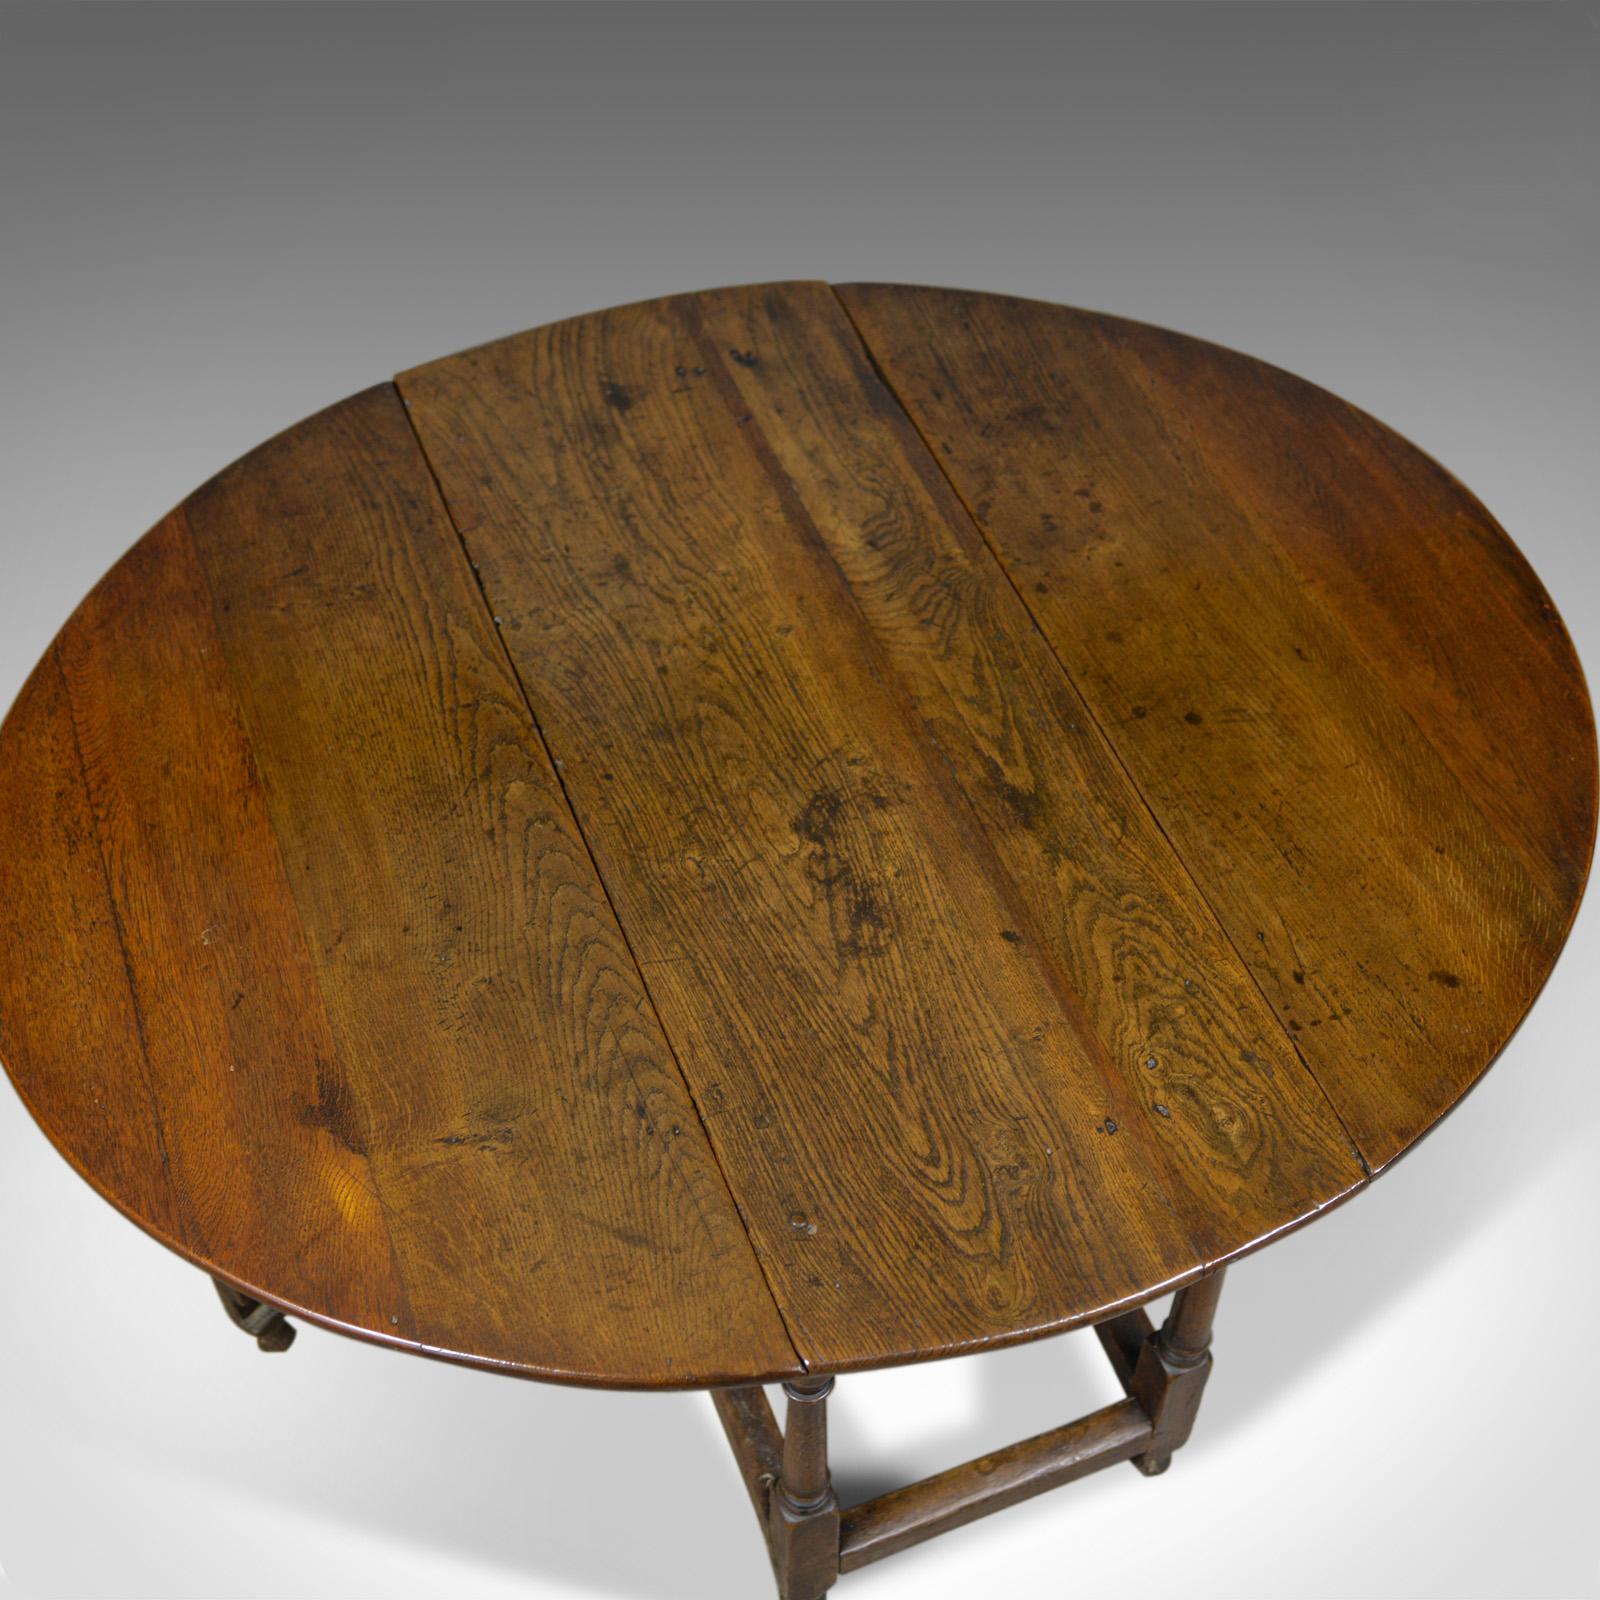 This is an antique gate leg table. An English, Georgian, oak, country kitchen dining table dating to the late 18th to early 19th century, circa 1800.

Crafted from generously thick English oak
Grain interest throughout with a desirable aged